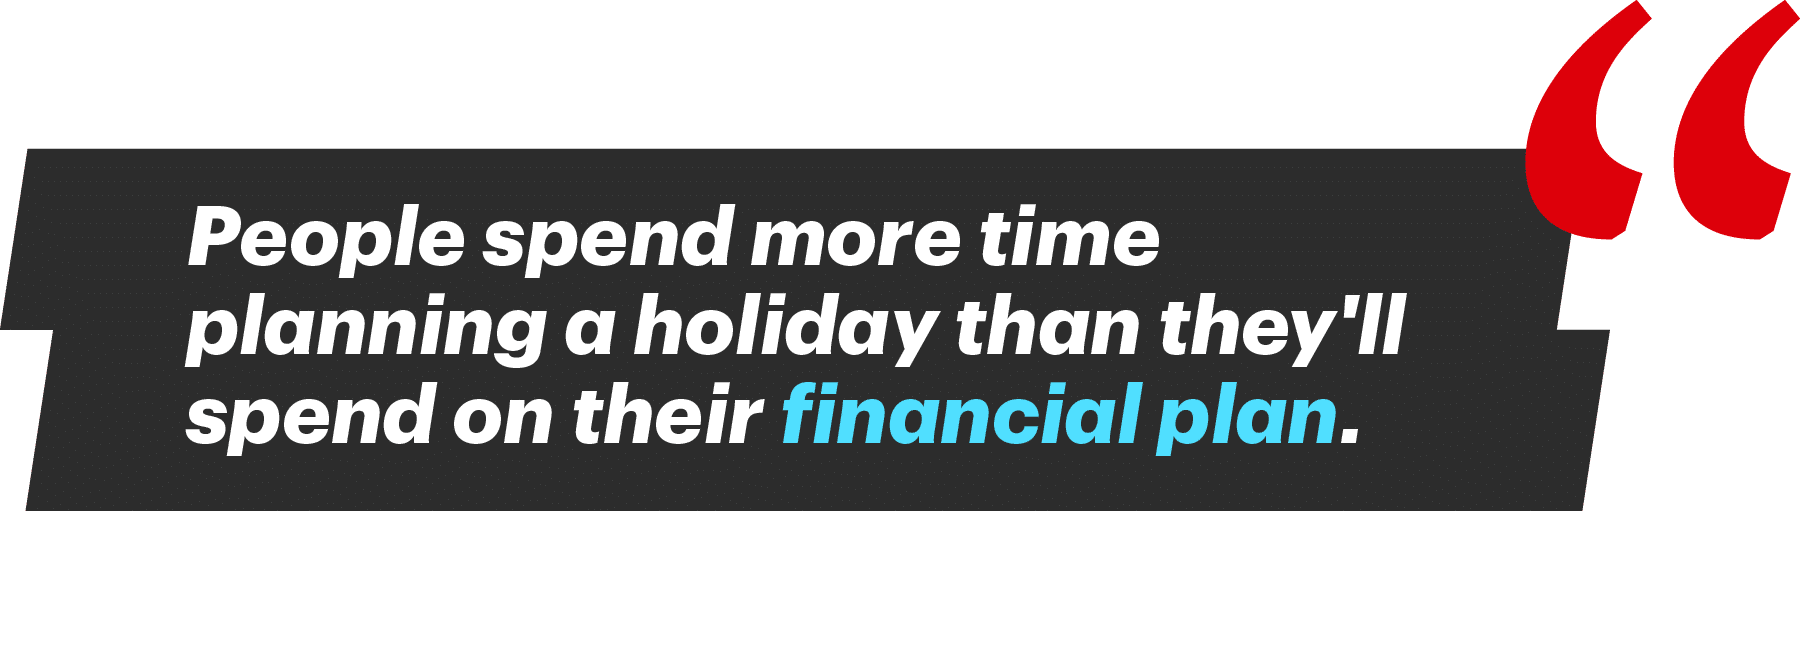 People spend more time planning a holiday than they'll spend on their financial plan.